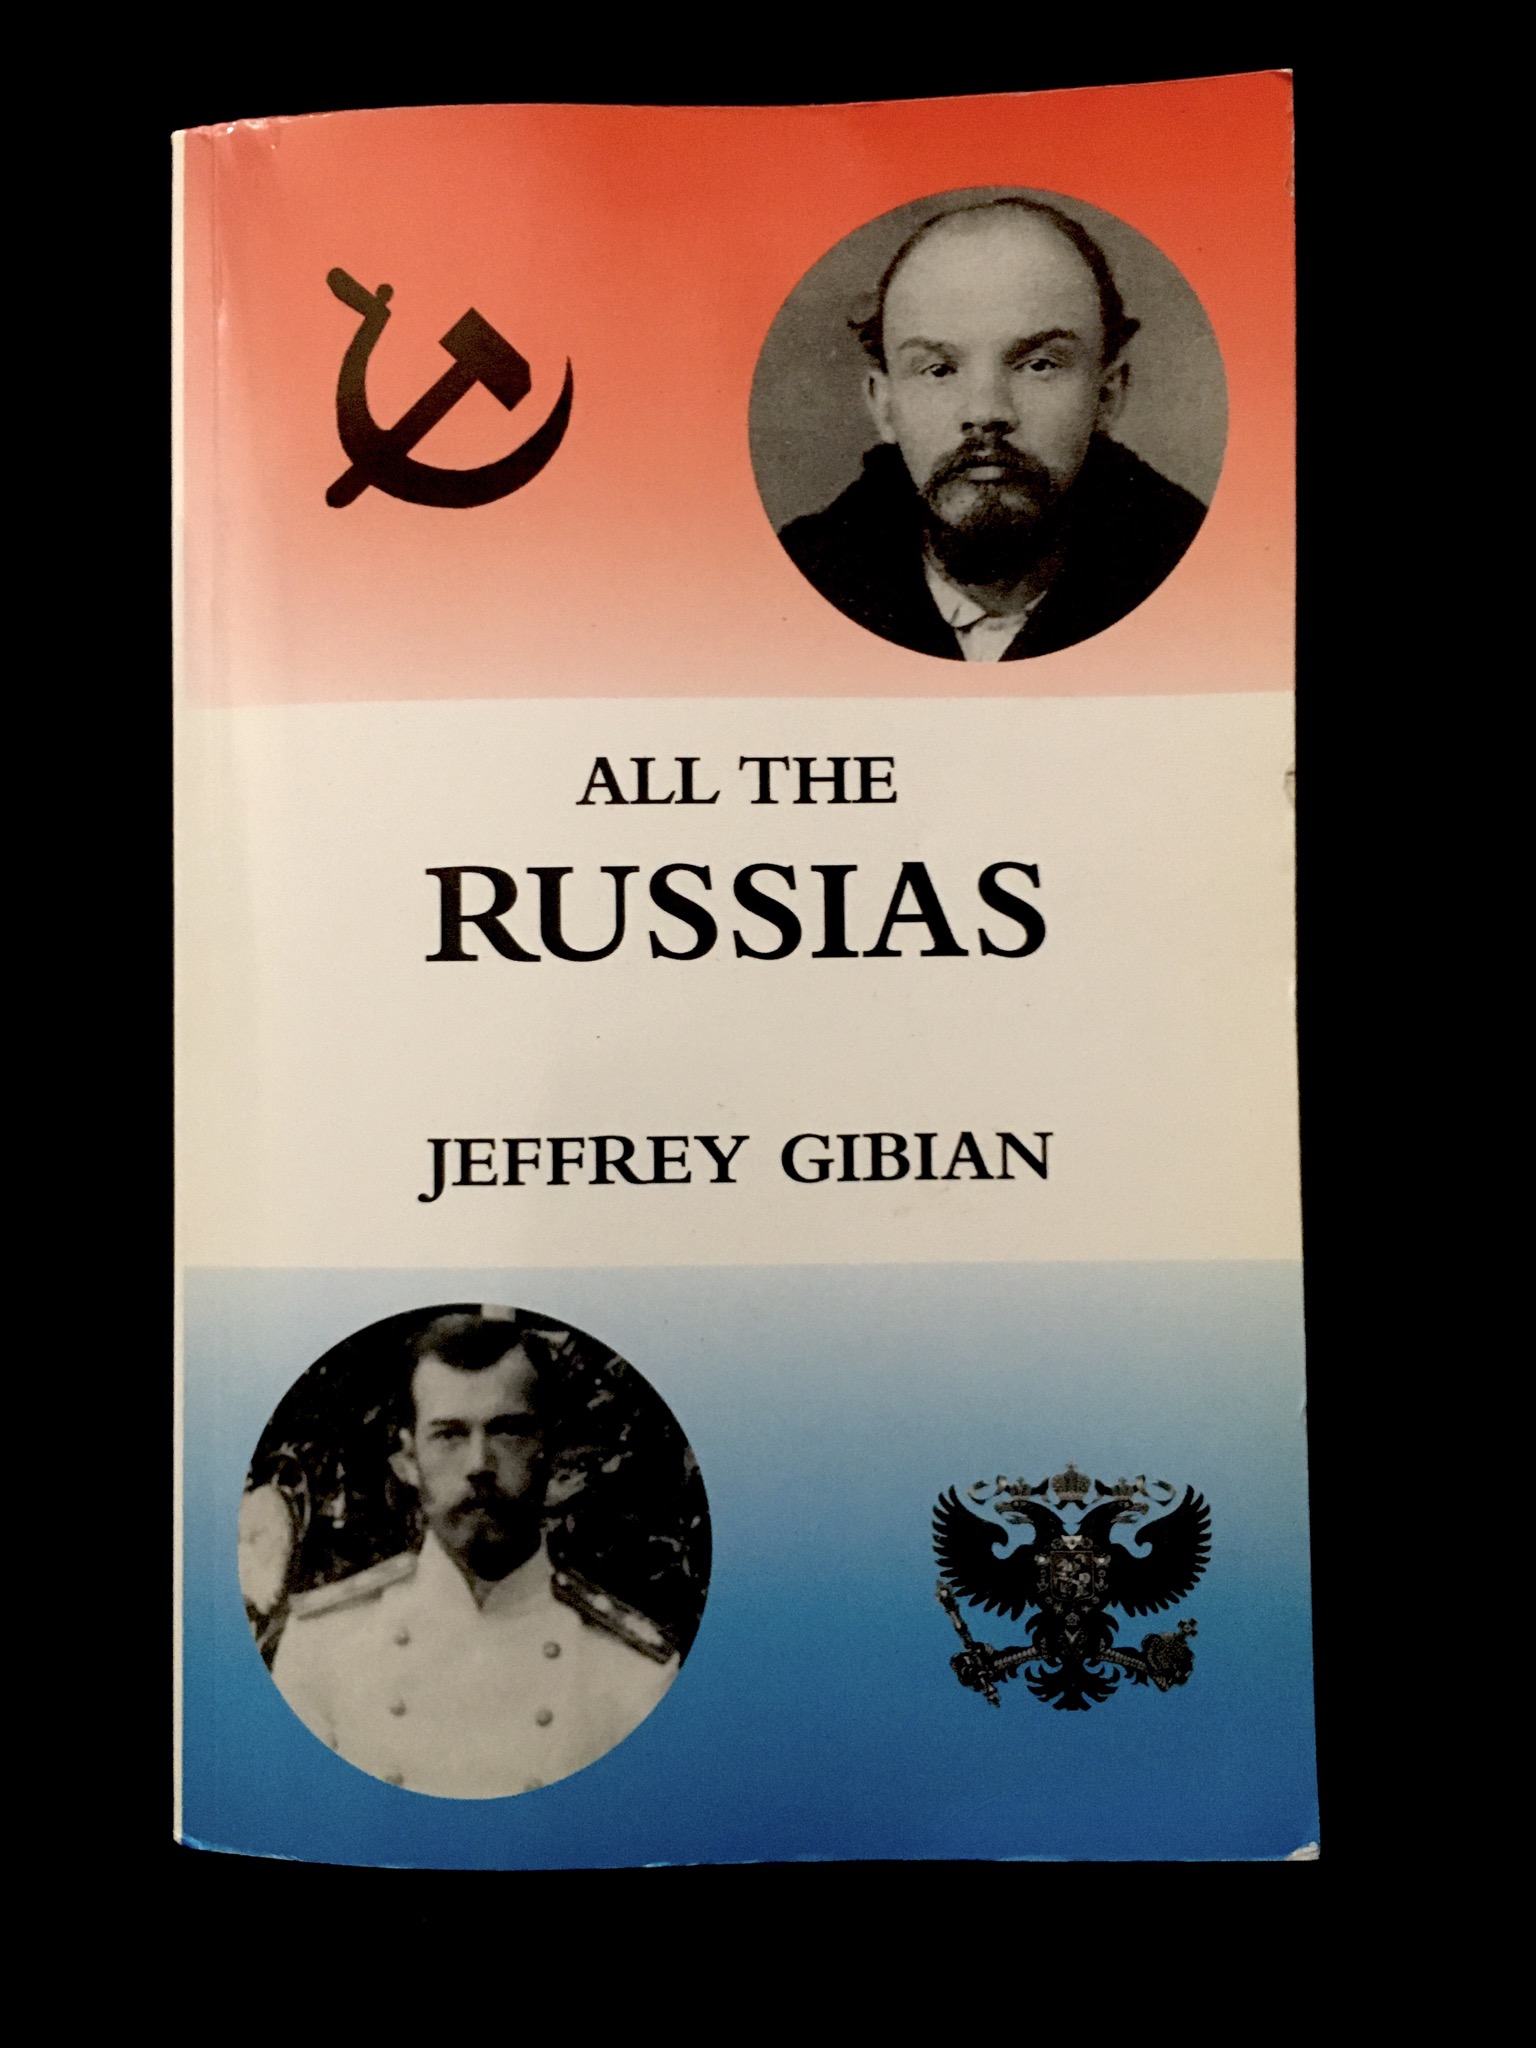 All The Russias by Jeffrey Giban